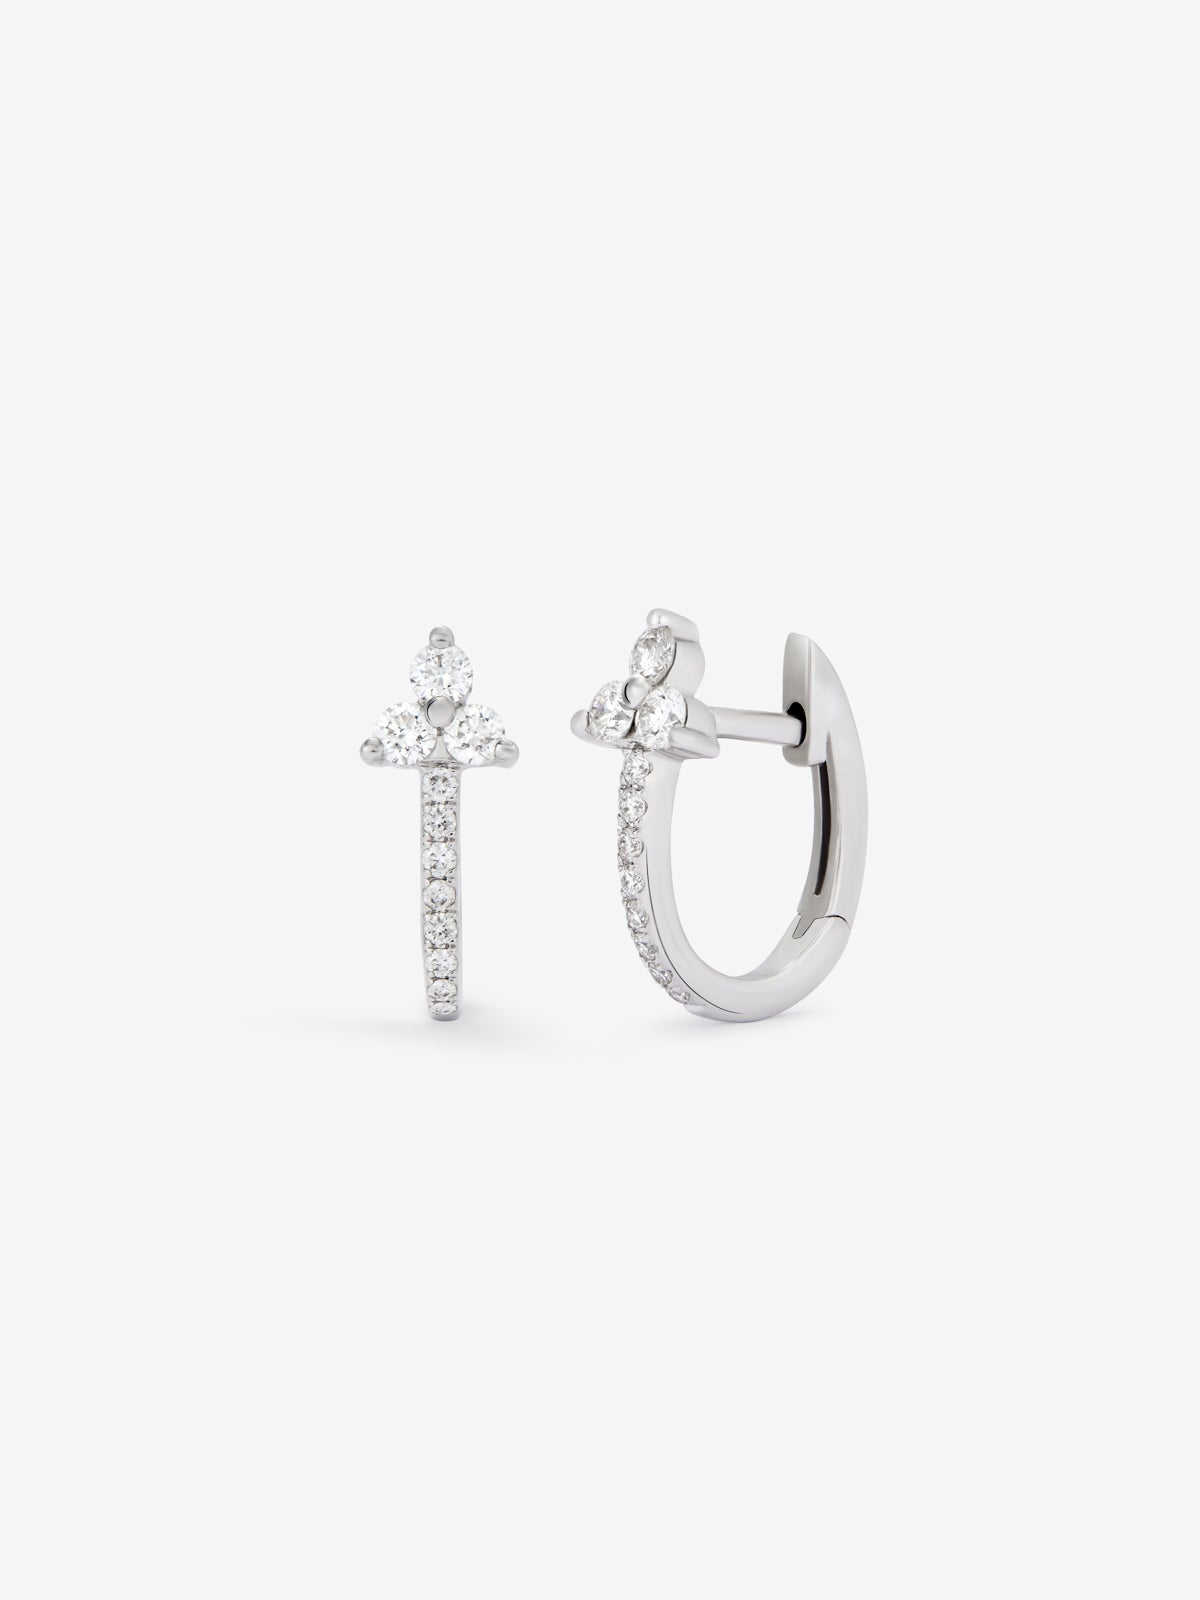 18K white gold hoop earrings with 22 brilliant-cut diamonds with a total of 0.28 cts